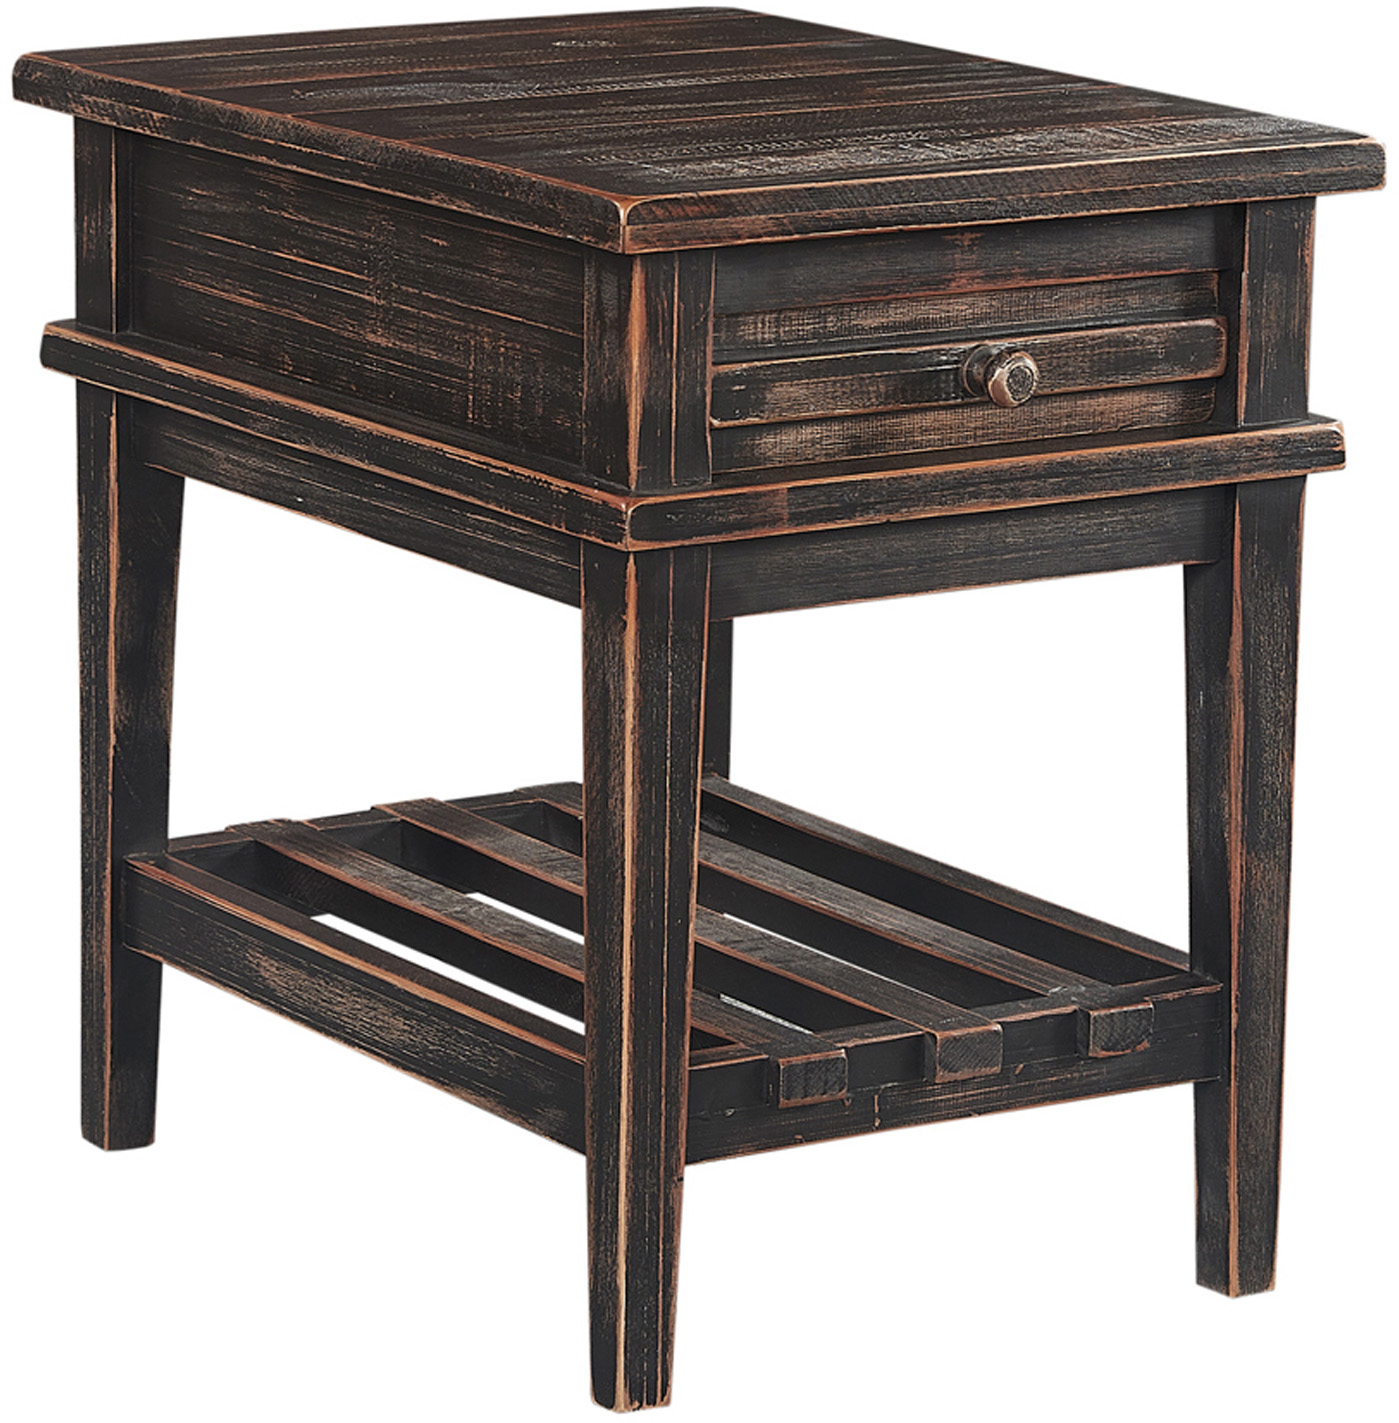 Reeds Farm Chairside Table